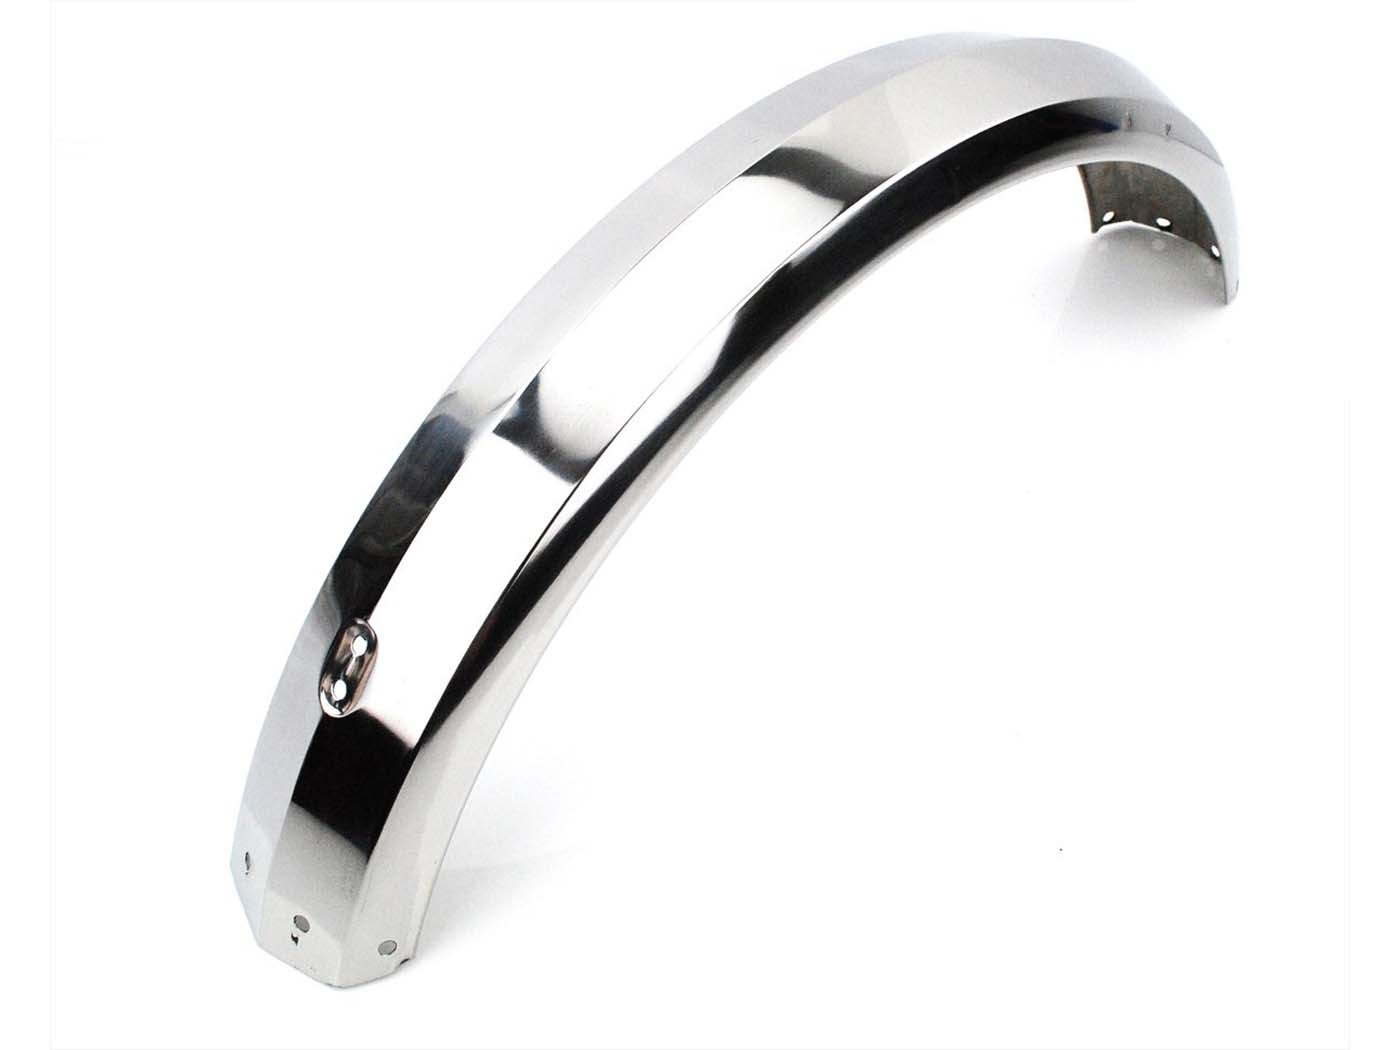 Front Wheel Chrome Mudguard Front INOX For Puch Maxi S N Moped Moped